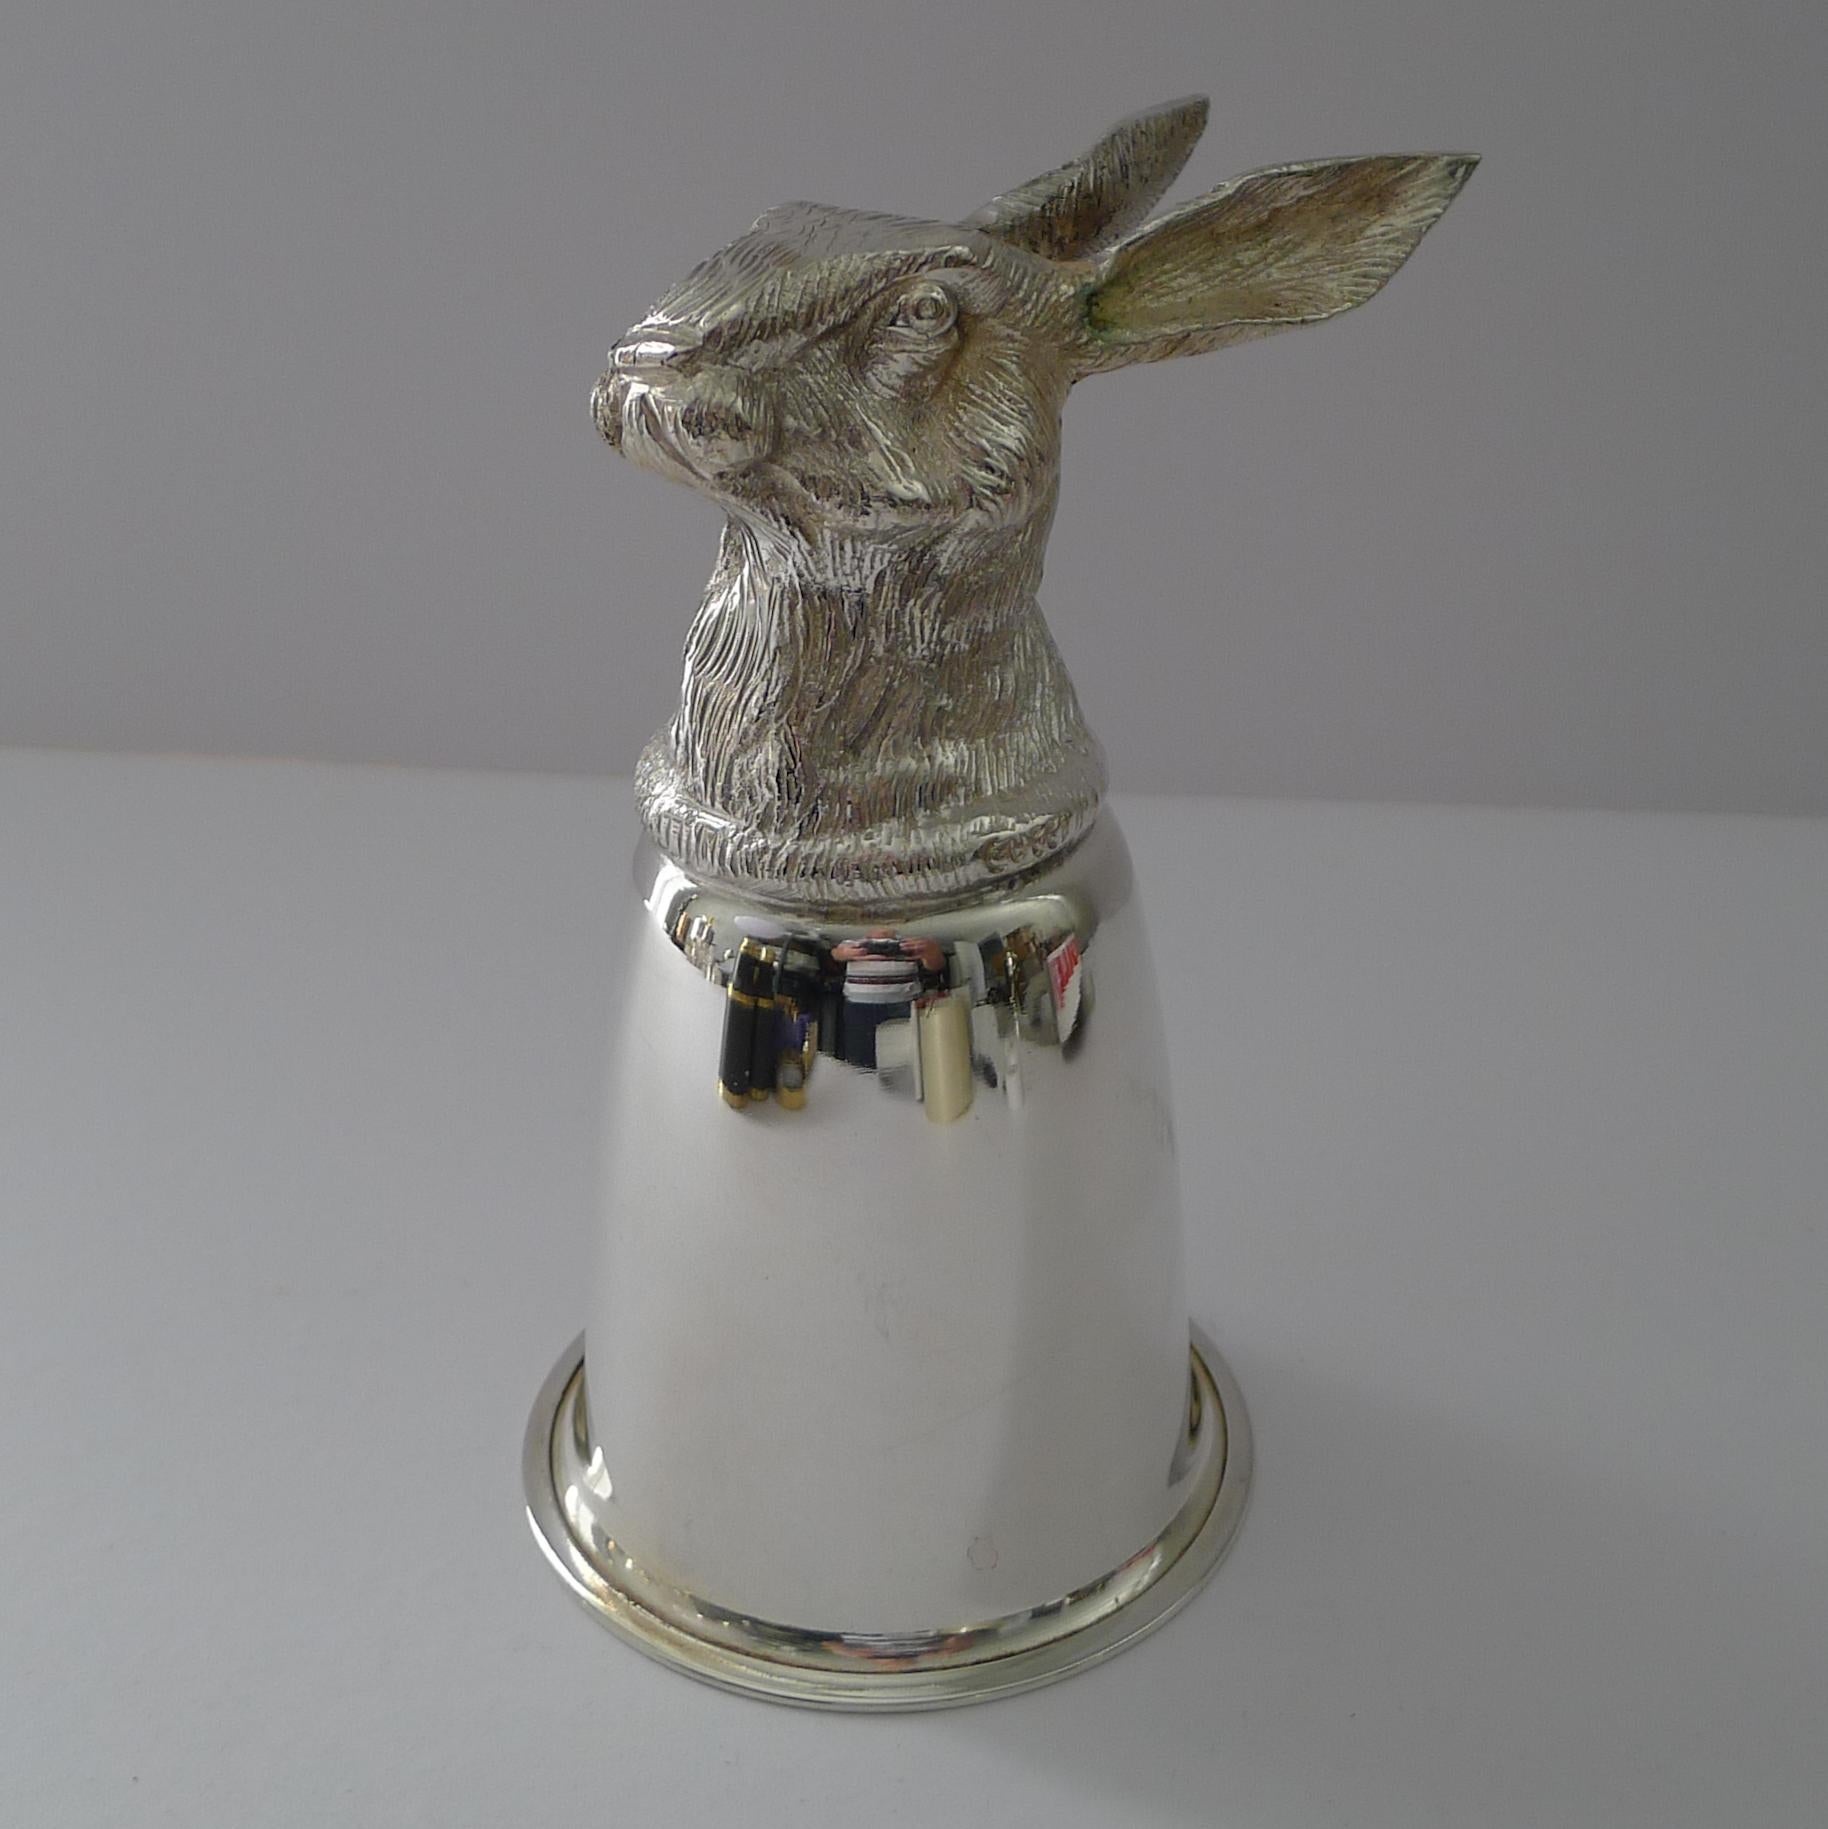 A handsome vintage Italian stirrup cup made from silver plate in the form of a Hare, beautifully executed and signed by the luxury fashion house of Gucci.

Highly collectable and in superb condition having just returned from our silversmith's